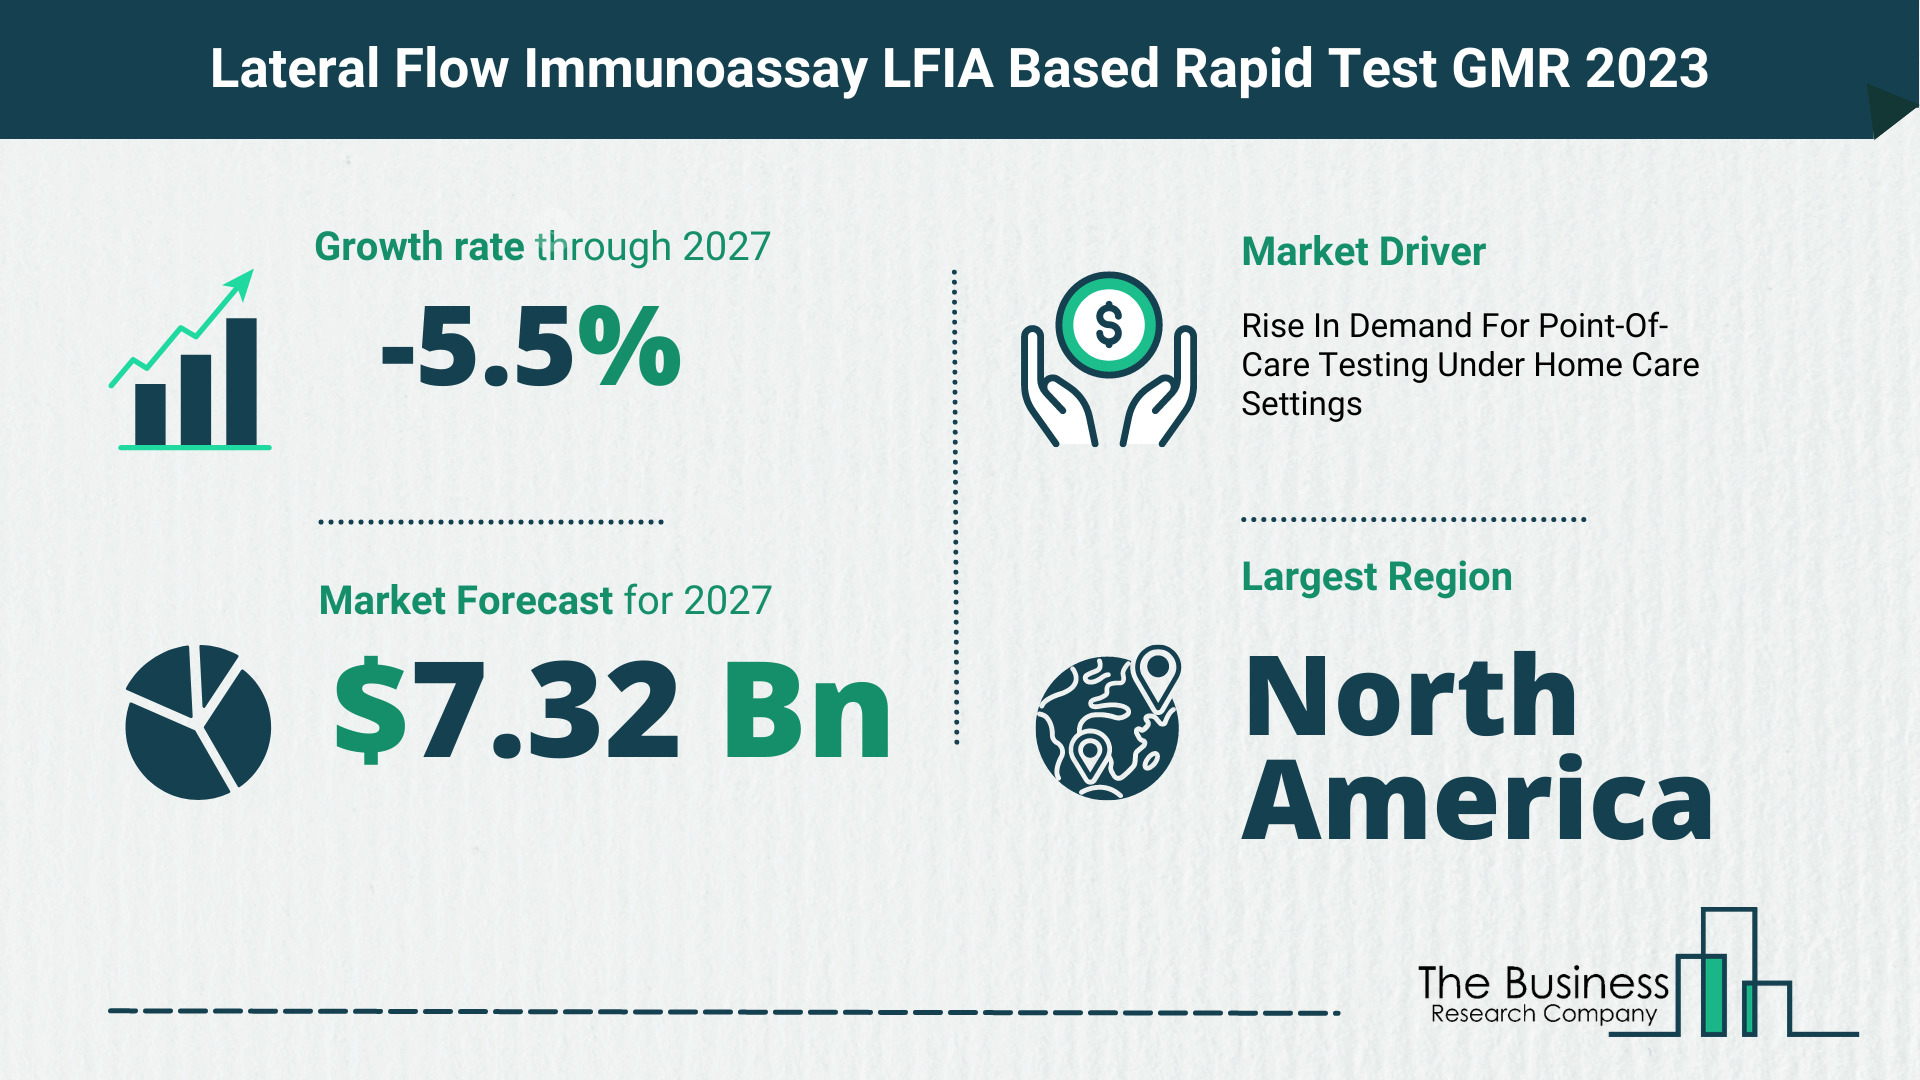 Lateral Flow Immunoassay LFIA Based Rapid Test Market Size, Share, And Growth Rate Analysis 2023